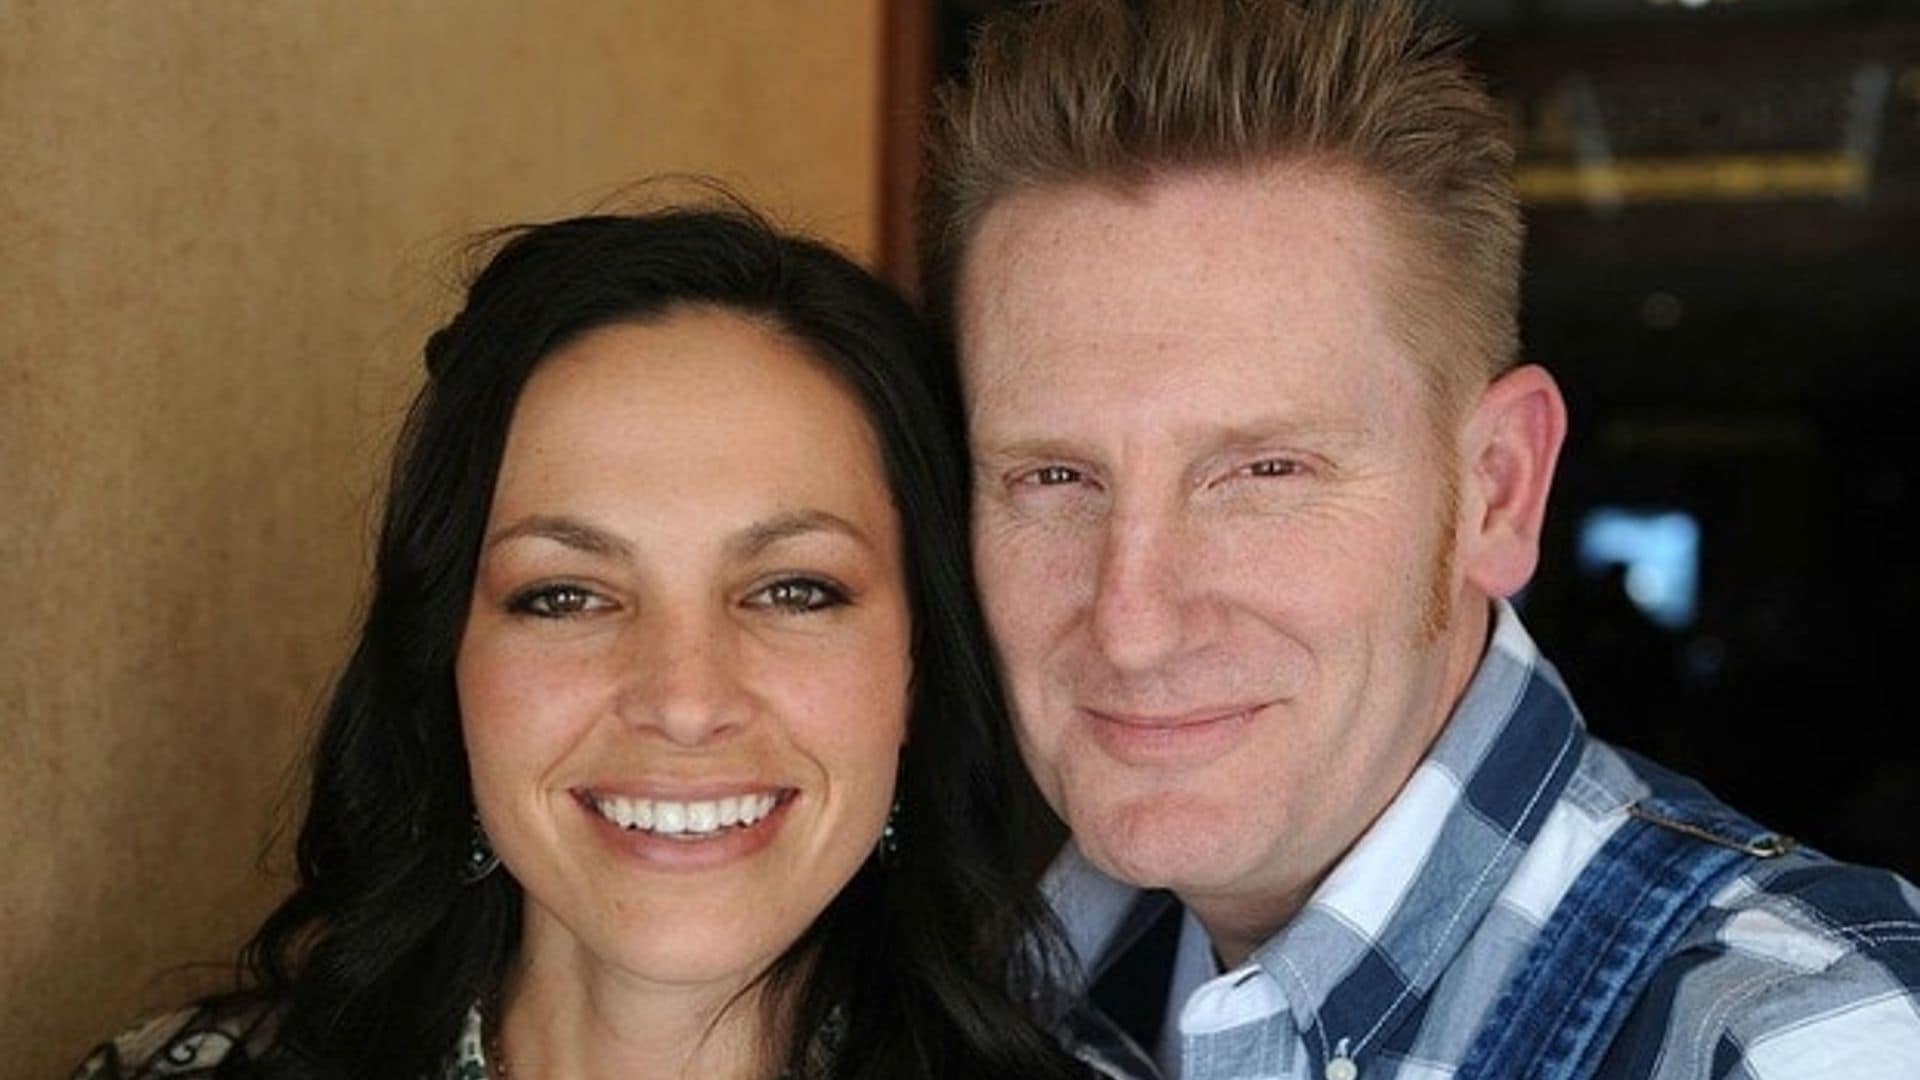 Rory Feek gets emotional when accepting Grammy win for late wife Joey